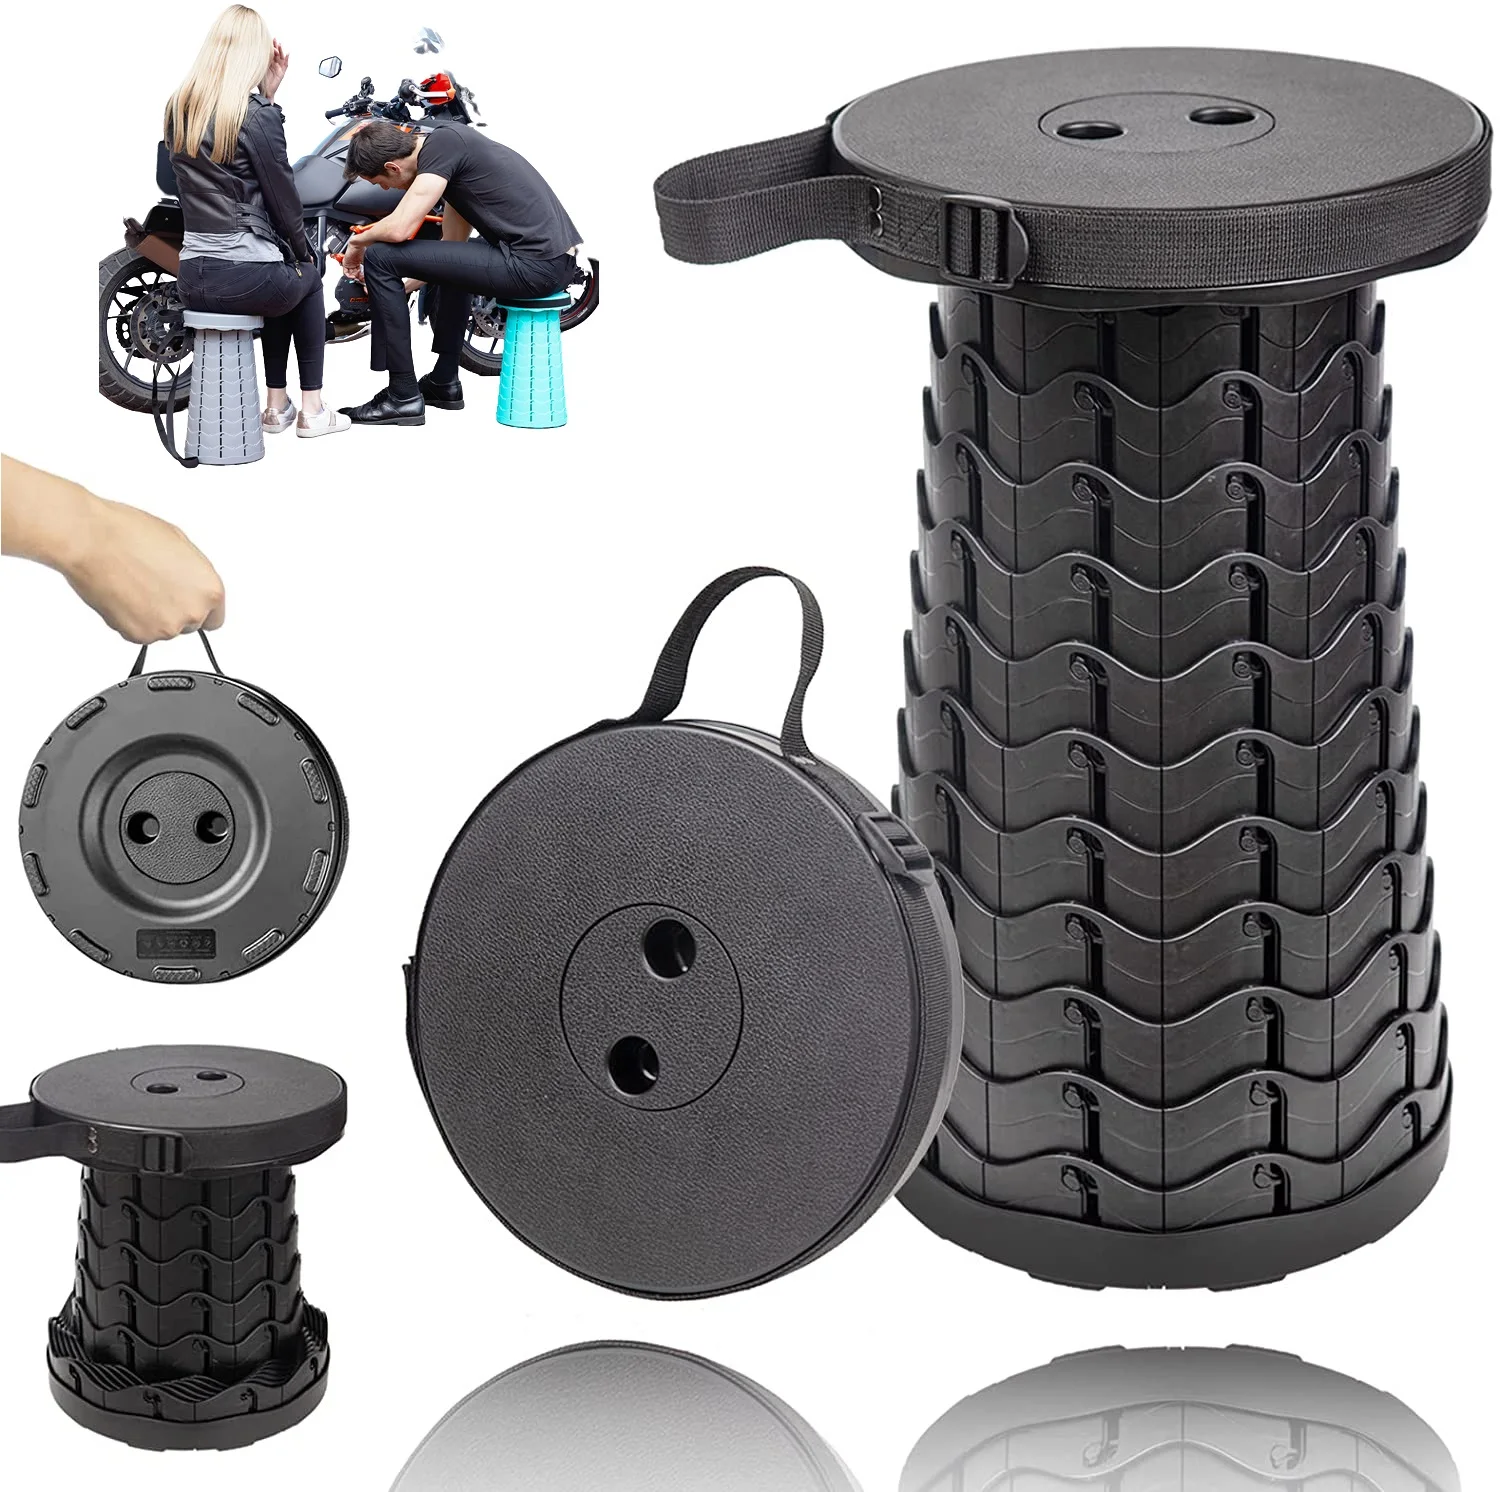 Portable Folding Telescopic Stool, Subway Queuing Chair and Outdoor Camping Fishing Stool